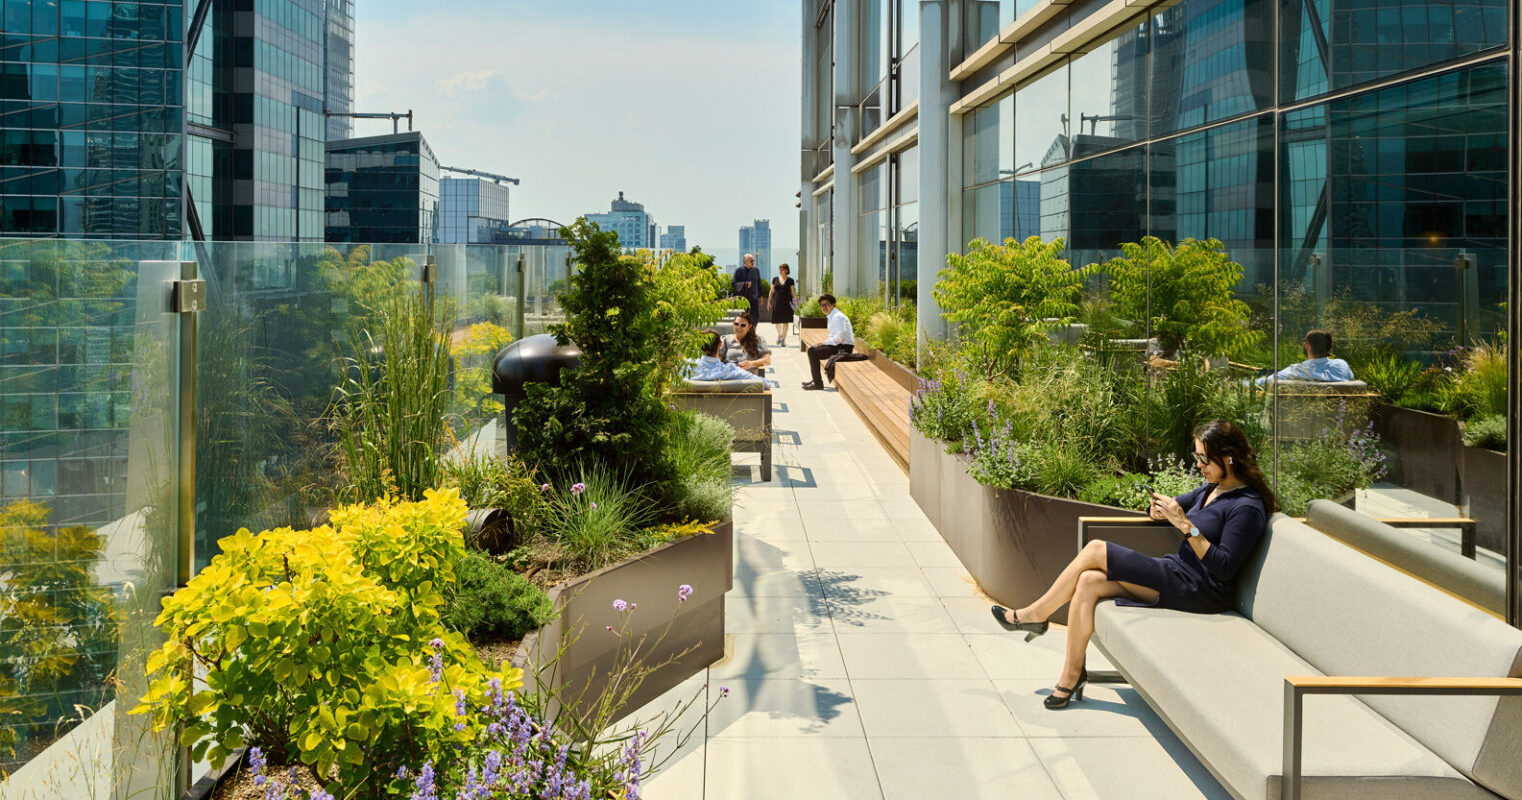 A rooftop garden terrace of an office building with benches, lush plantings, and a view of skyscrapers under a clear sky.